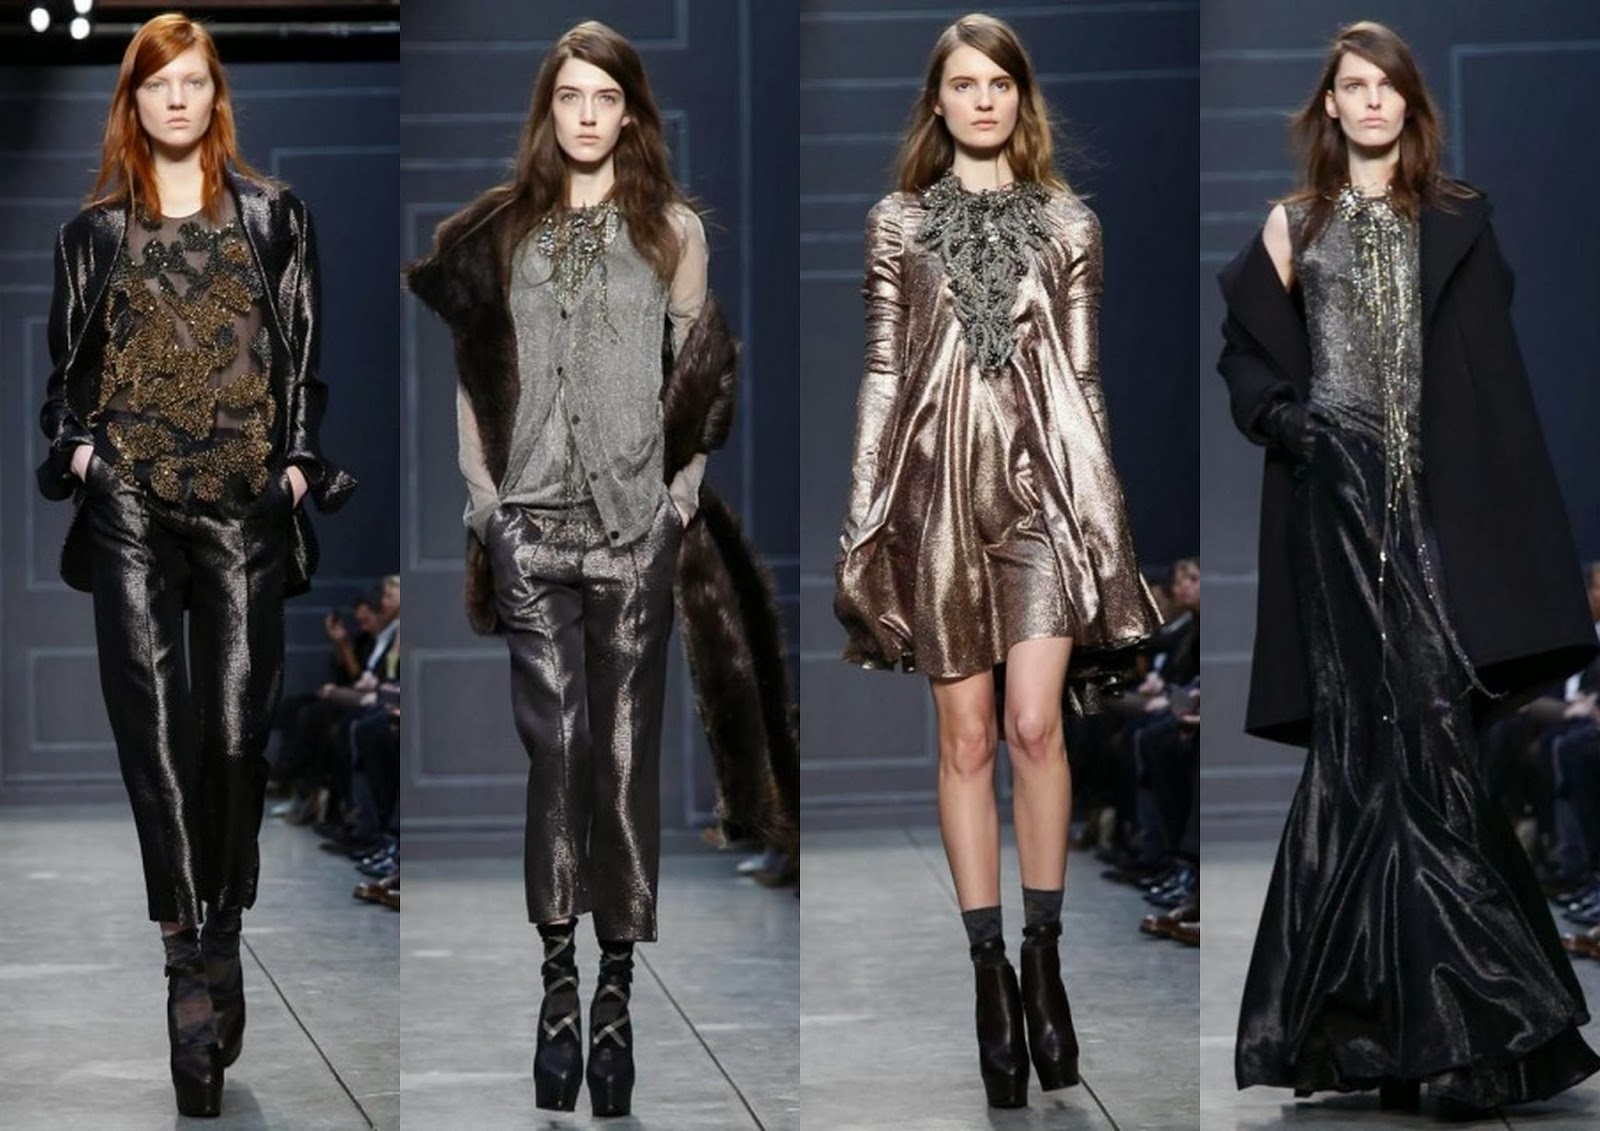 NEW YORK FASHION WEEK: Vera Wang Fall 2014 Collection - Live Life in Style